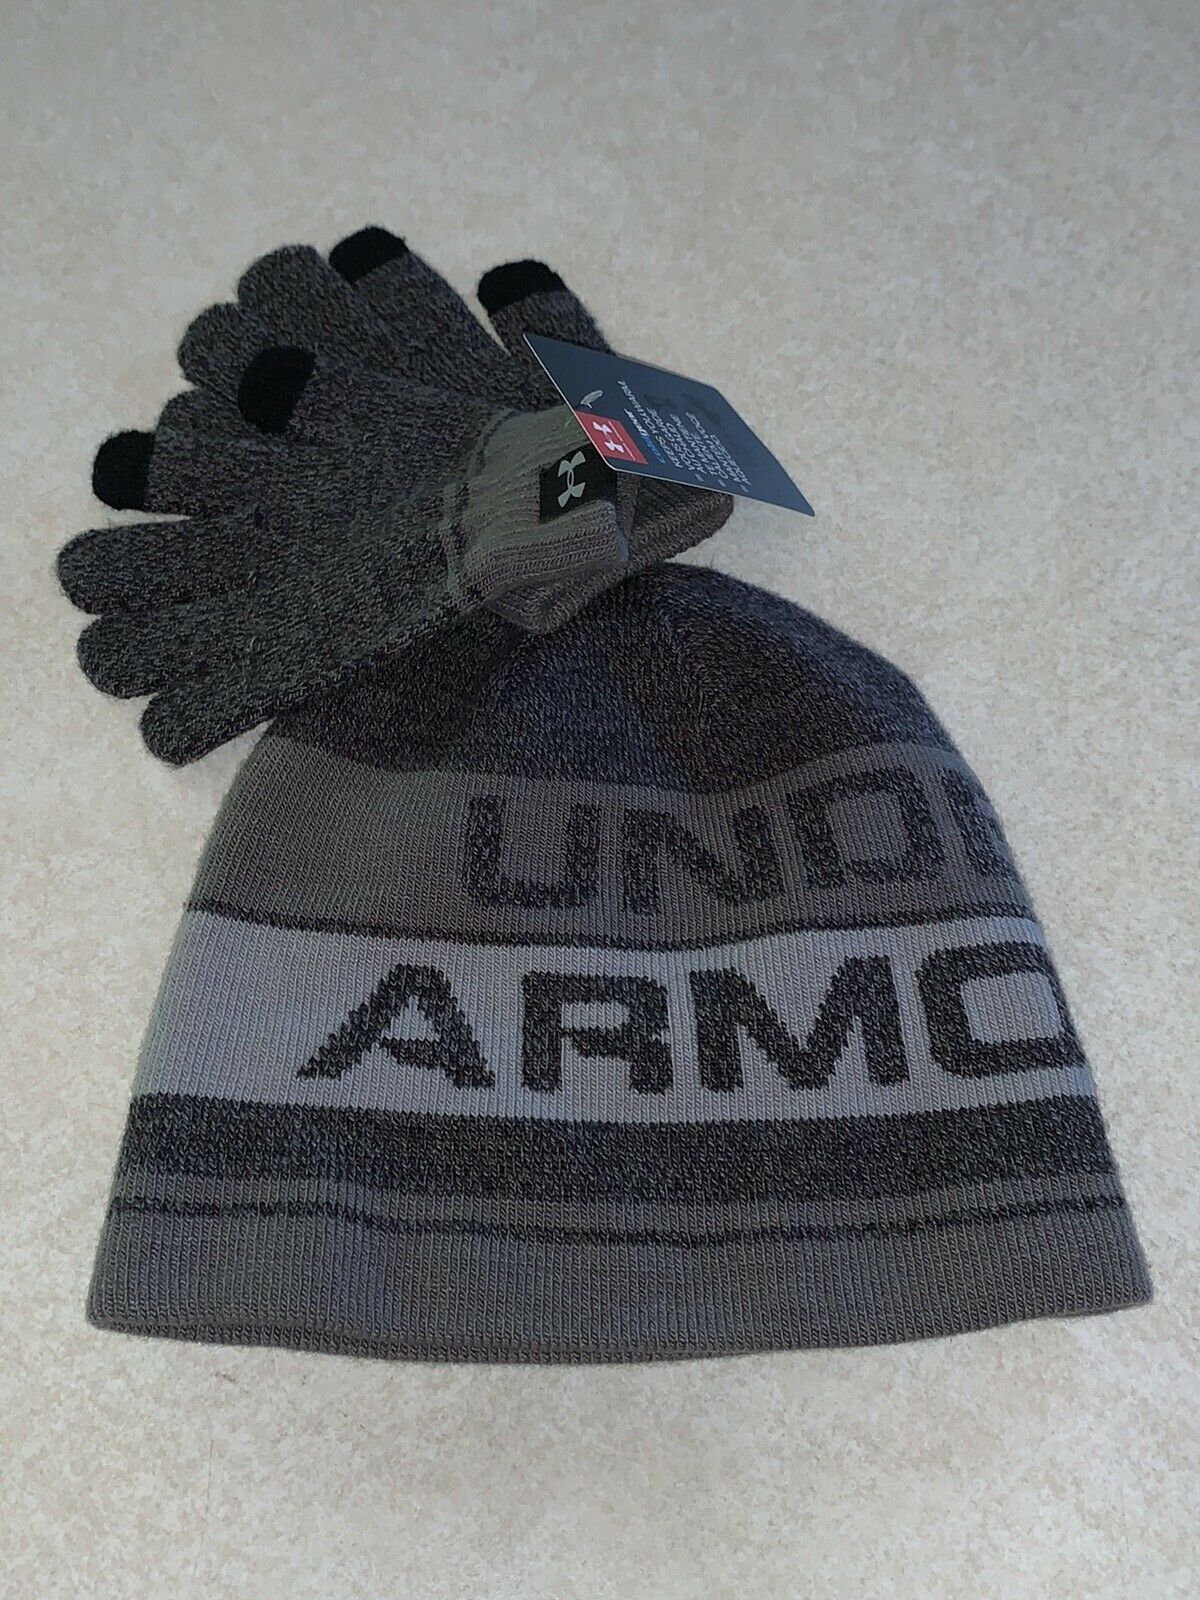 Under Armour Boys Youth Coldgear Knit Beanie Hat Gloves Set Gray Nwt